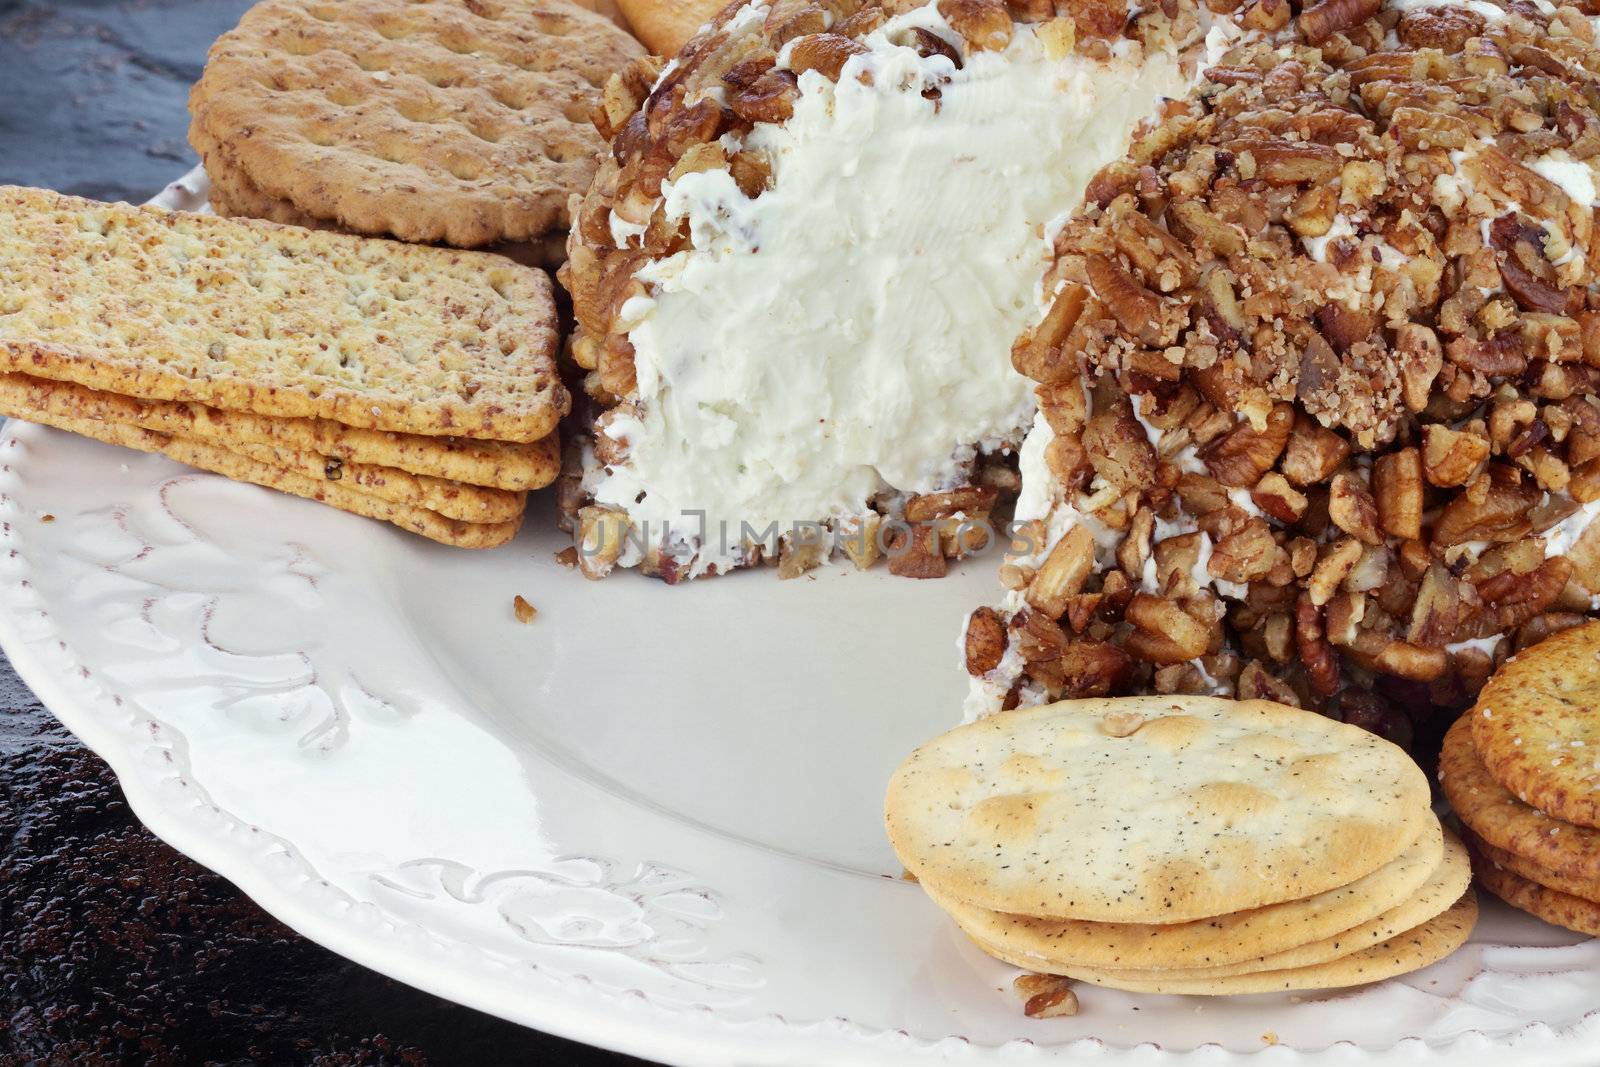 Cheese ball made with blue cheese and pecan nuts. Served with a variety of crackers.